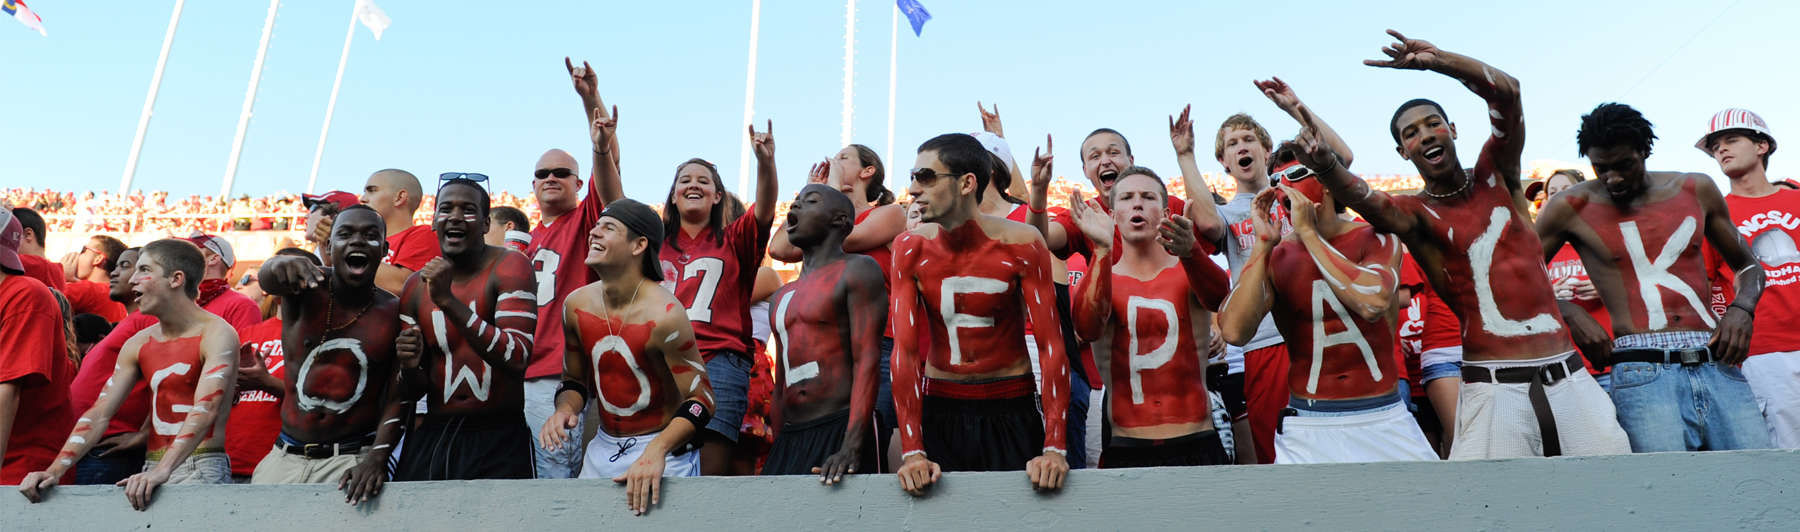 NC State fans go all-out with the red and white paint as they cheer on the Pack during a game against Western Carolina at Carter-Finley stadium in September of 2010.